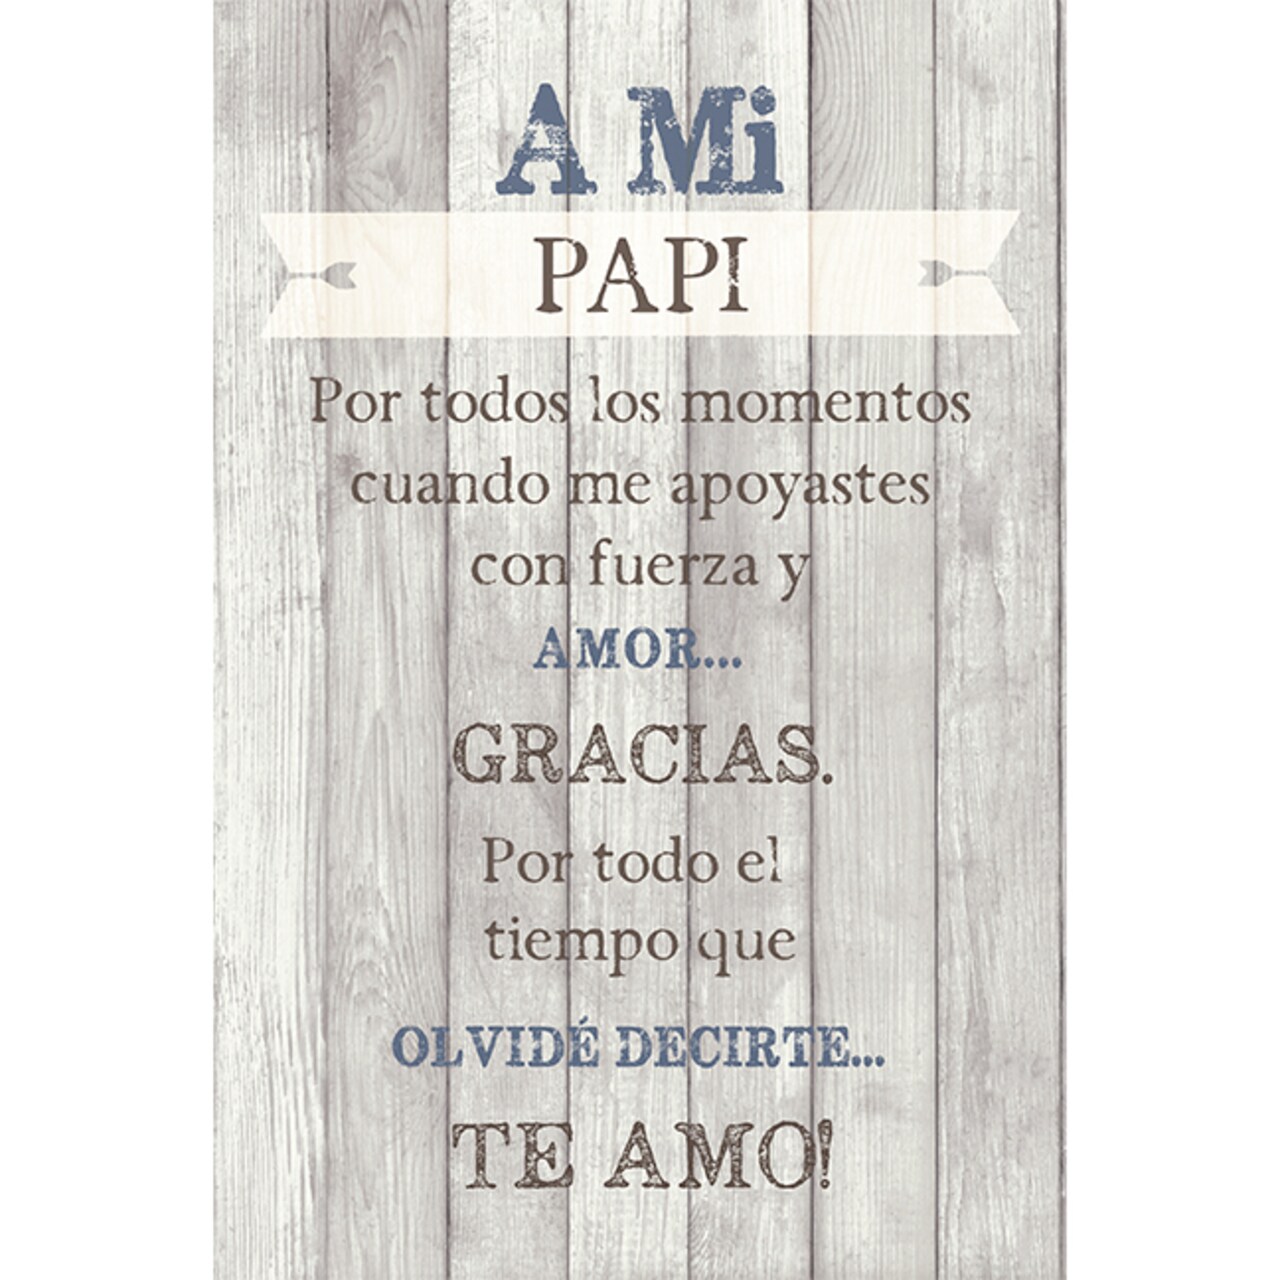 Dexsa A Mi Papi - To my Dad - Inspirational Saying in Spanish 6x9 Wood Plaque with Easel and Wall Hanger